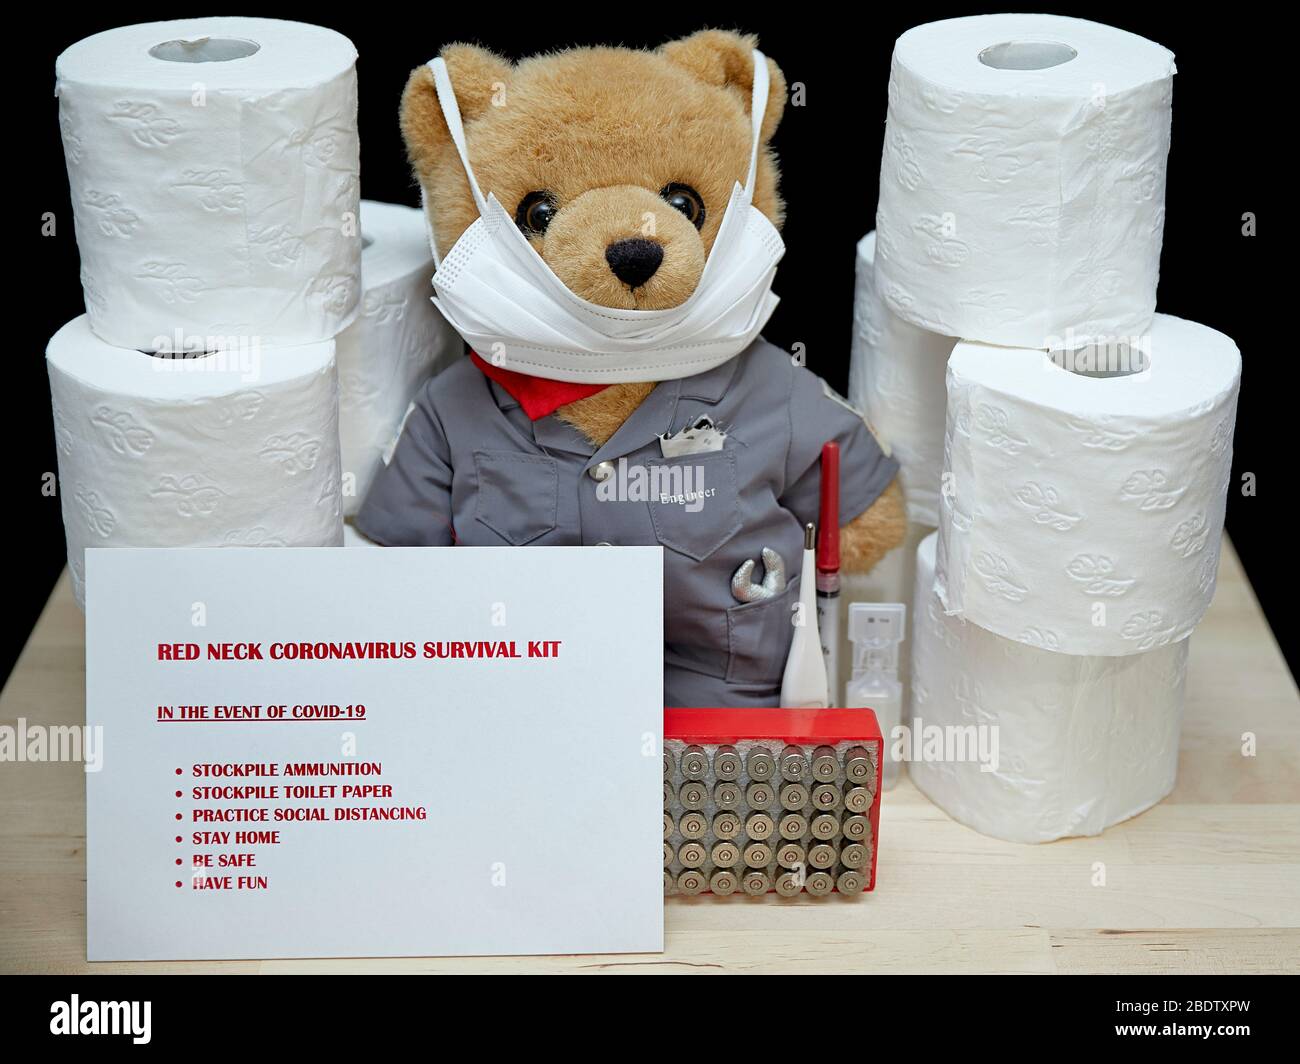 In the event of Coronavirus – You need a Red Neck Coronavirus Survival kit! Stockpile ammunition, toilet paper, stay home, be safe, have fun. Stock Photo